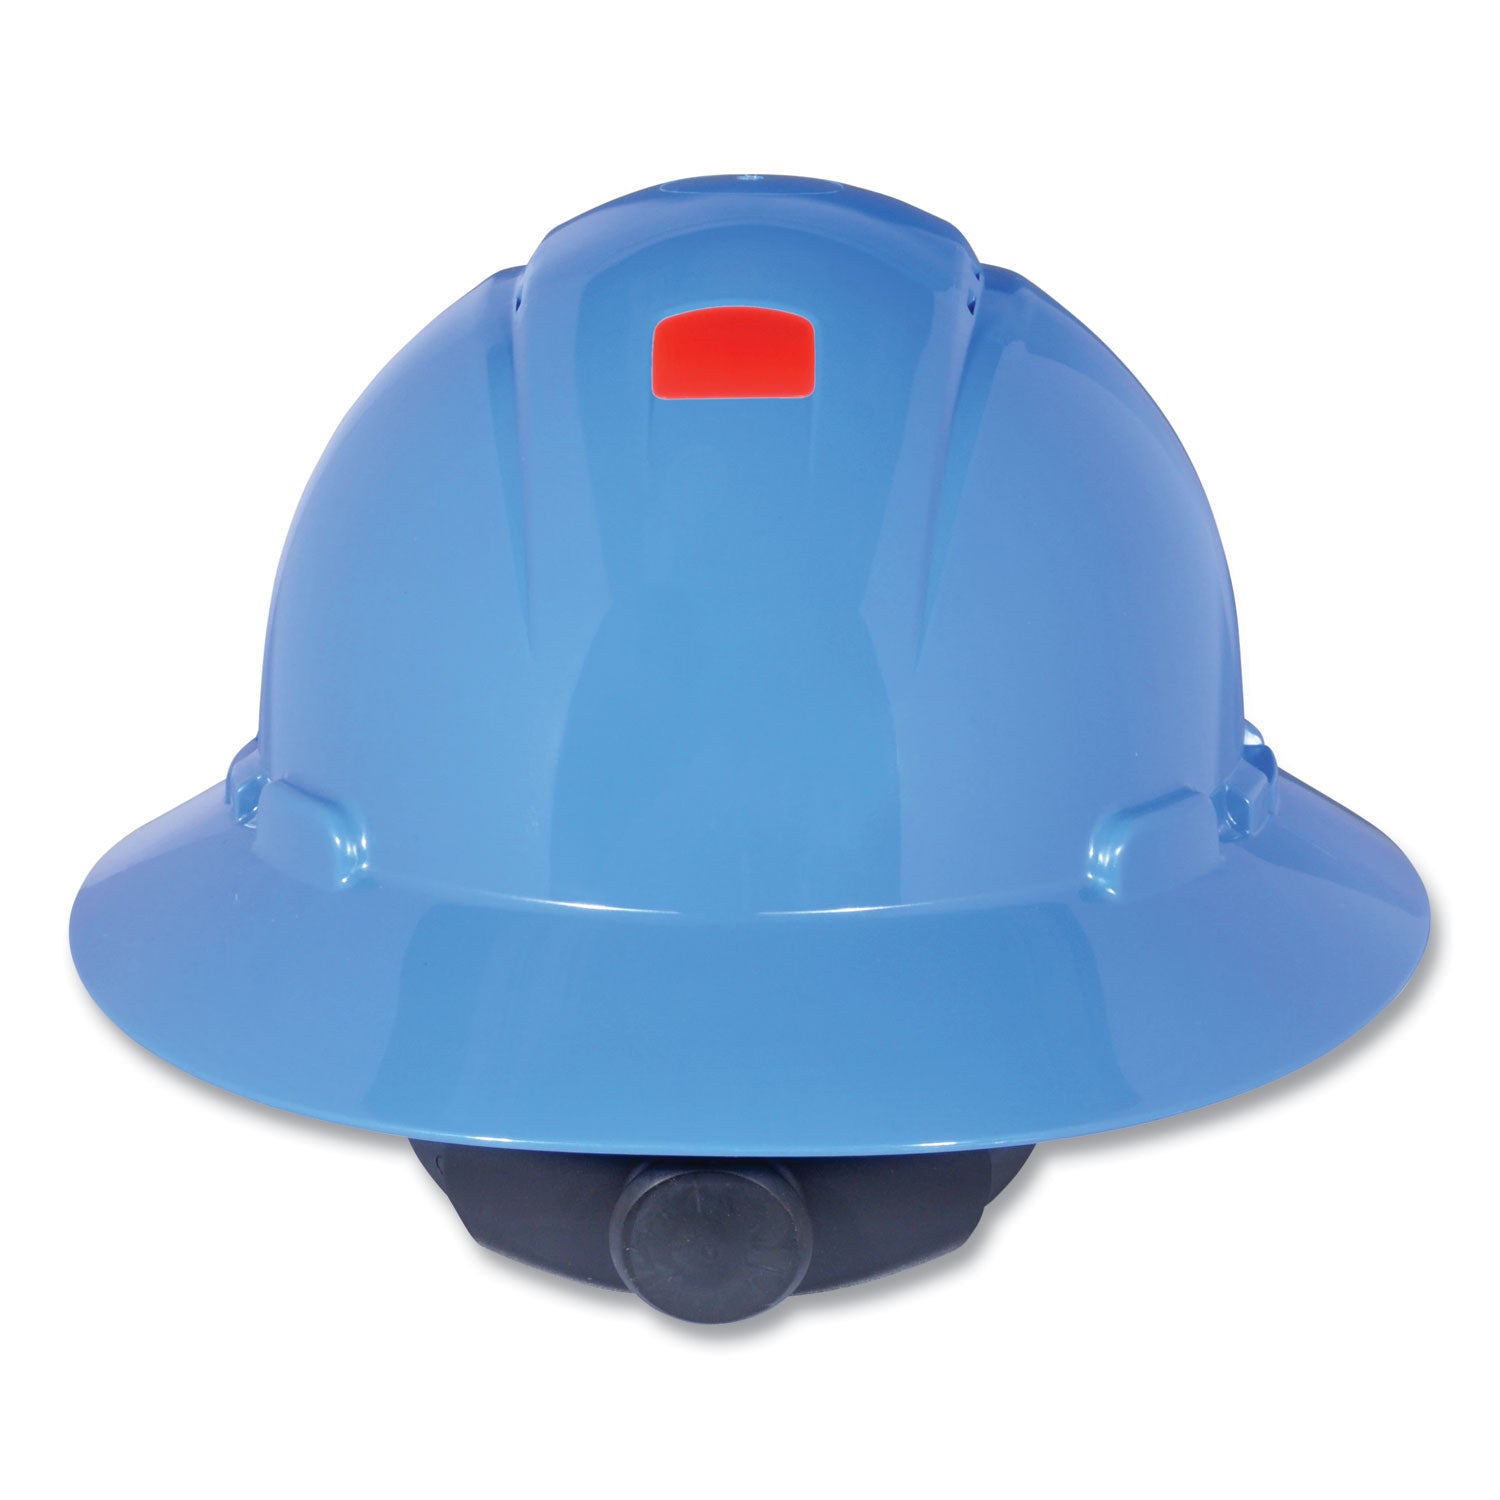 securefit-h-series-hard-hats-h-800-hat-with-uv-indicator-4-point-pressure-diffusion-ratchet-suspension-blue_mmmh803sfruv - 1